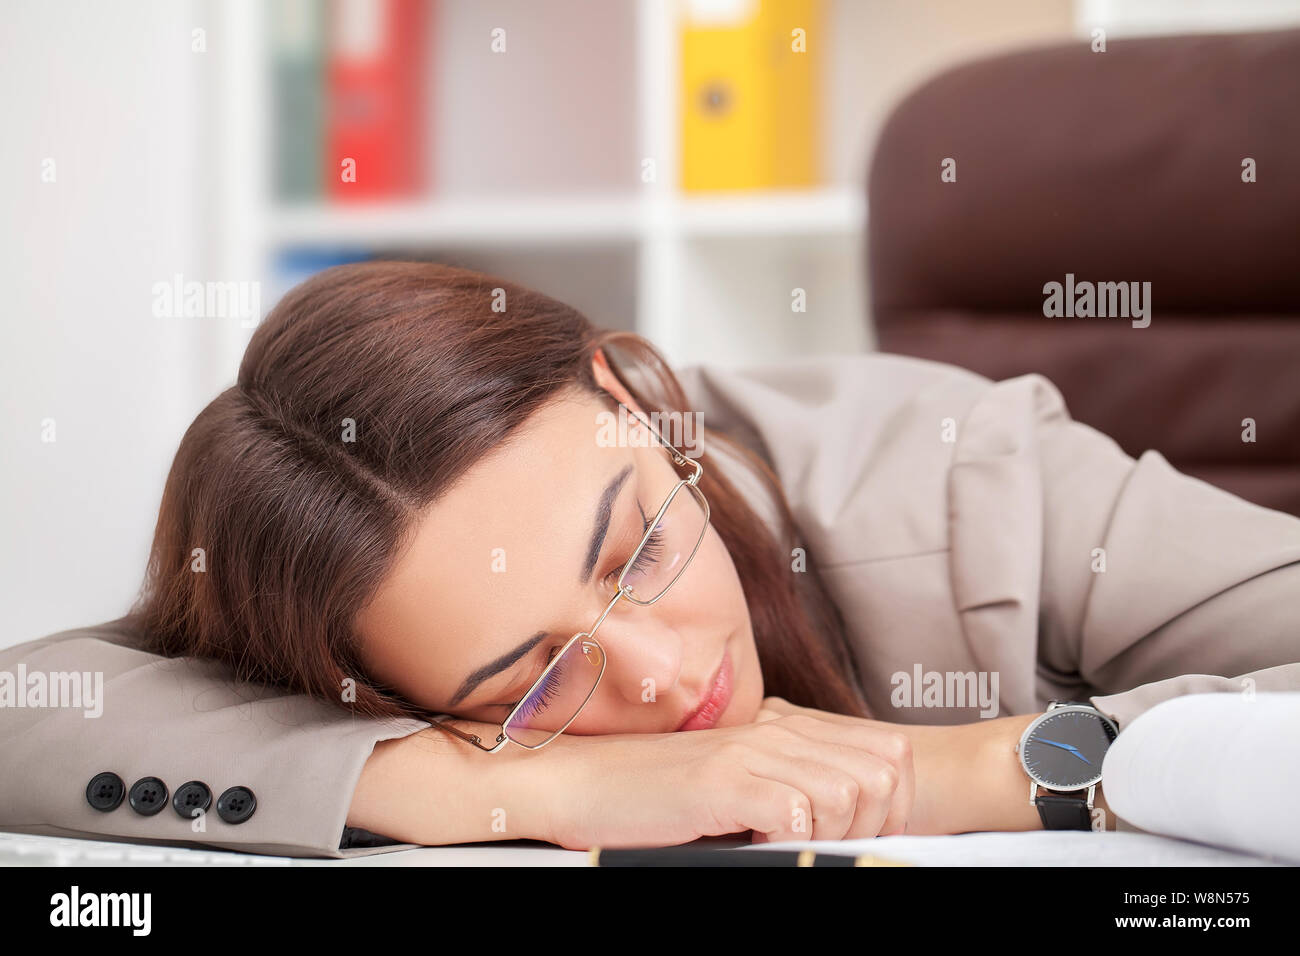 Young Tired Woman At Office Desk Sleeping With Eyes Closed Sleep